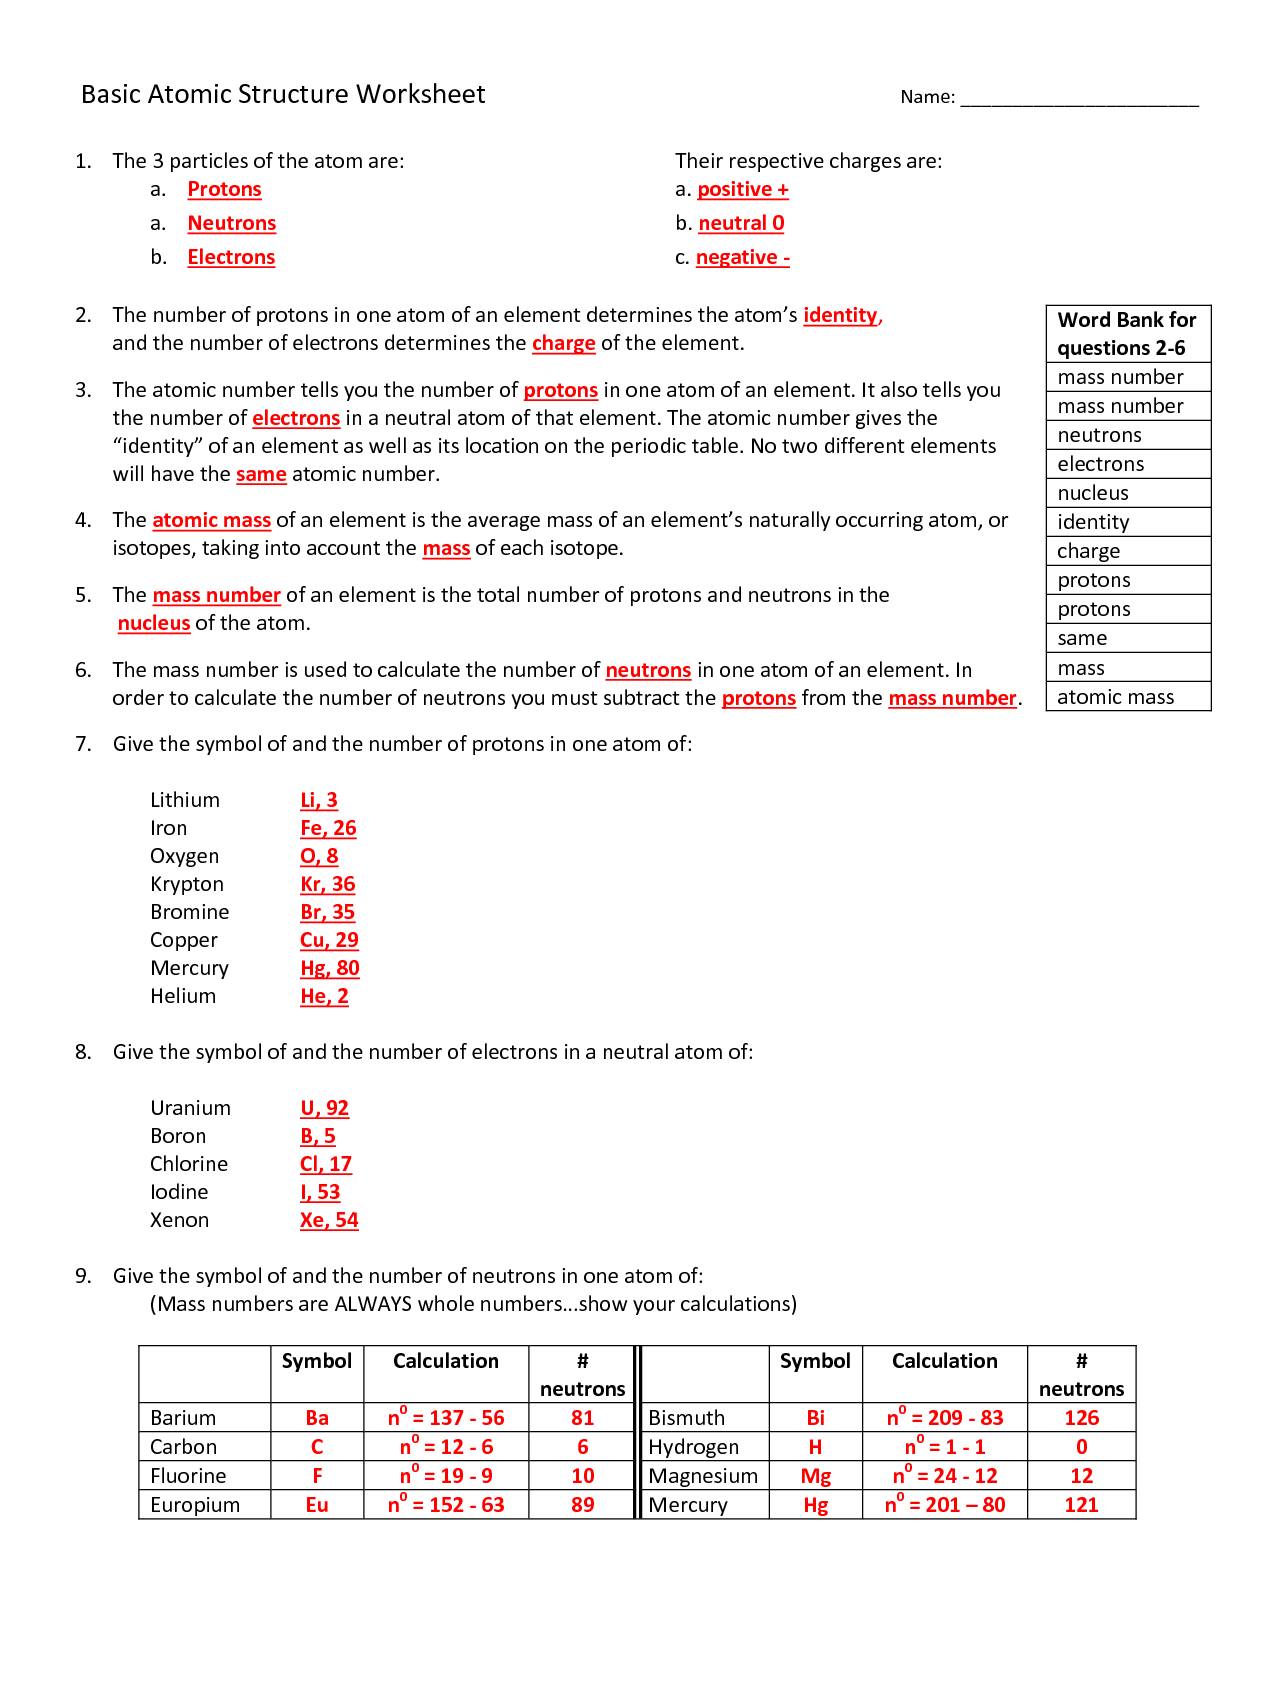 counting-subatomic-particles-worksheet-answers